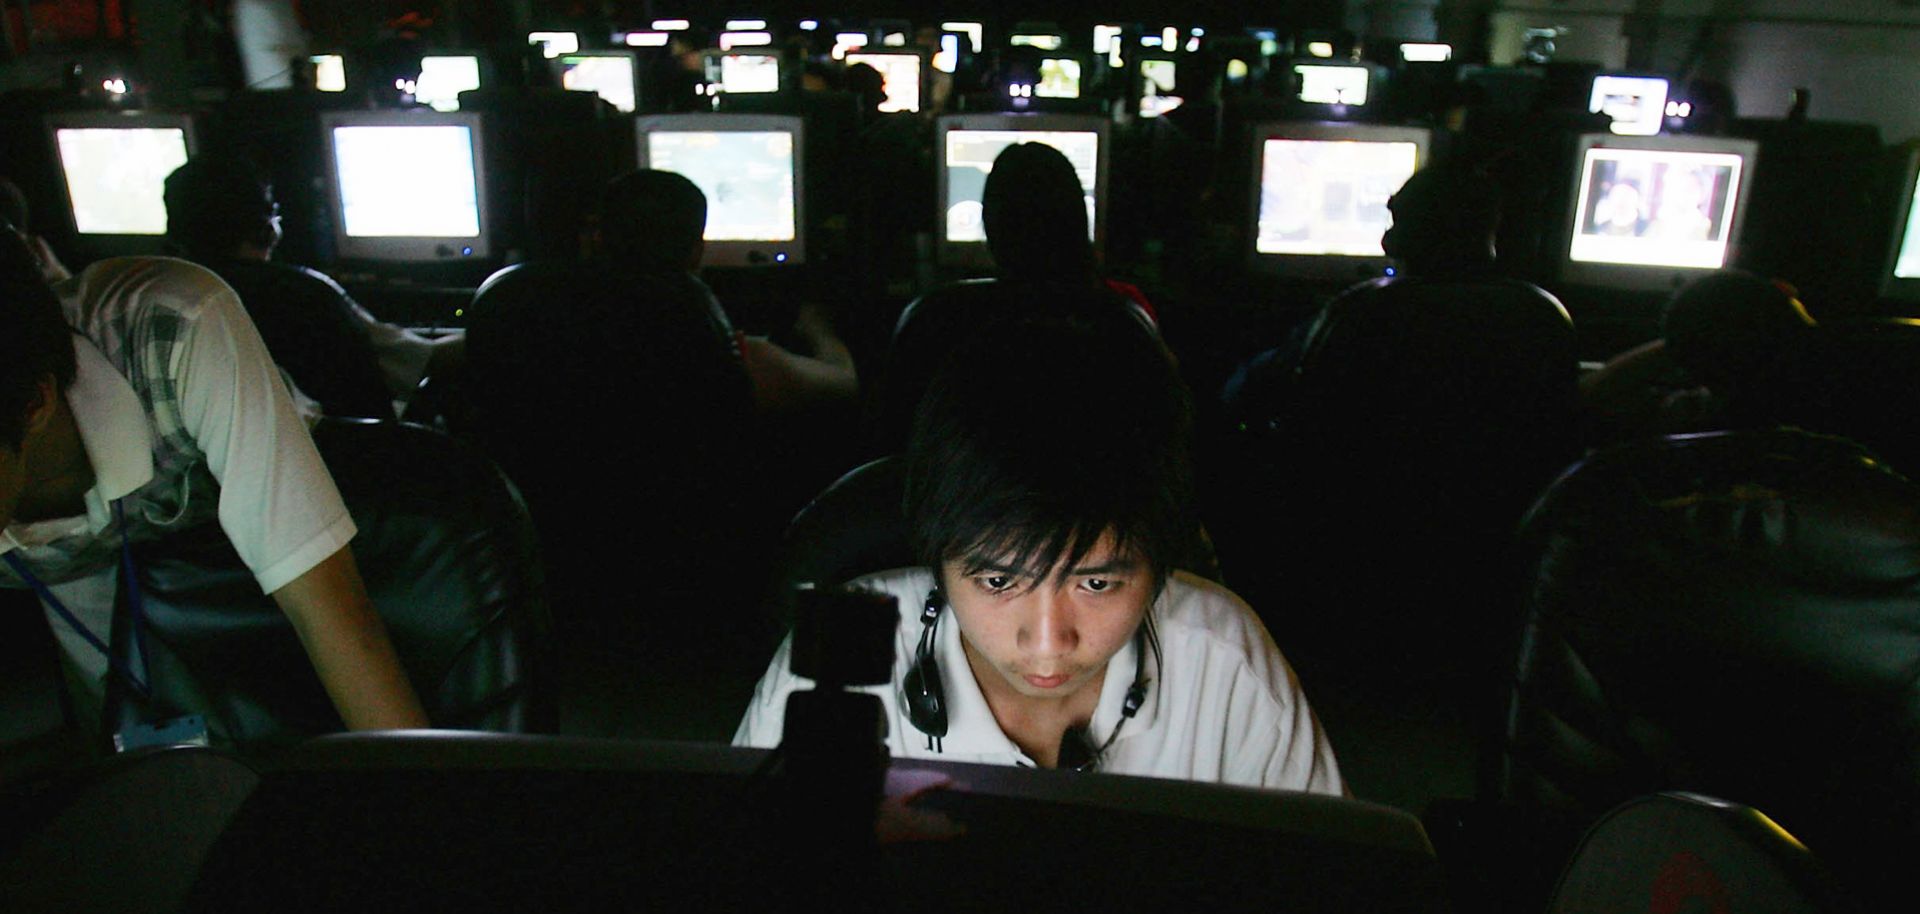 Chinese youngsters play online games overnight at an Internet cafe in Wuhan, Hubei Province.